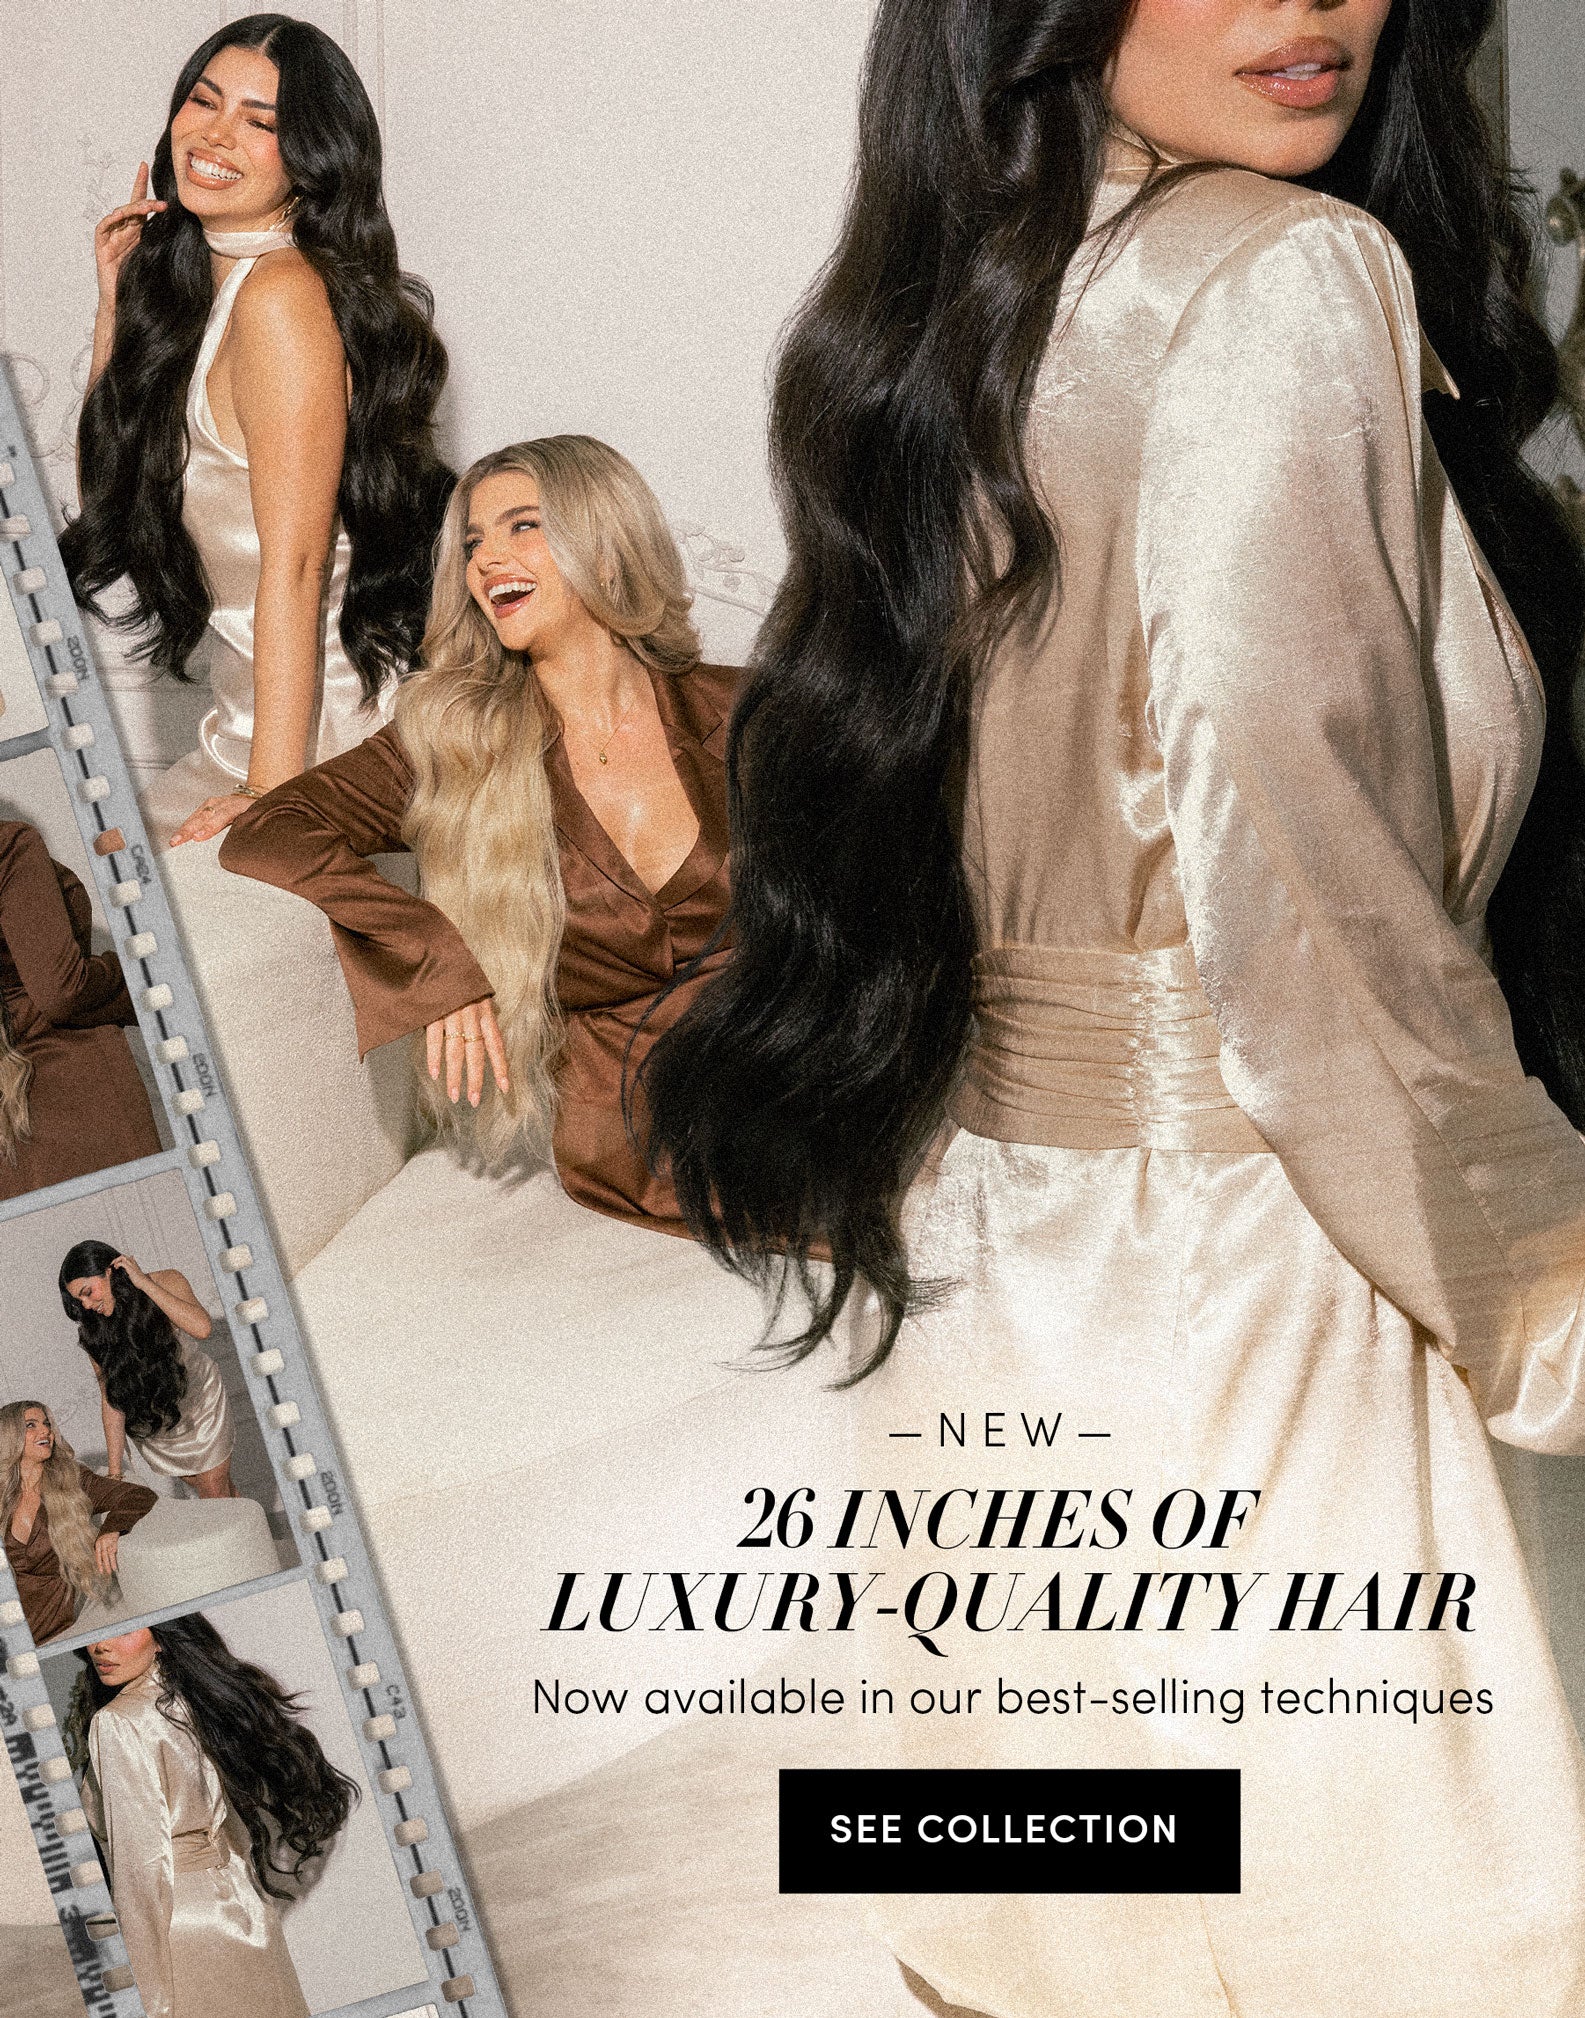 New! 26 inches of luxury-quality hair | Now available in our best-selling techniques | SEE COLLECTION